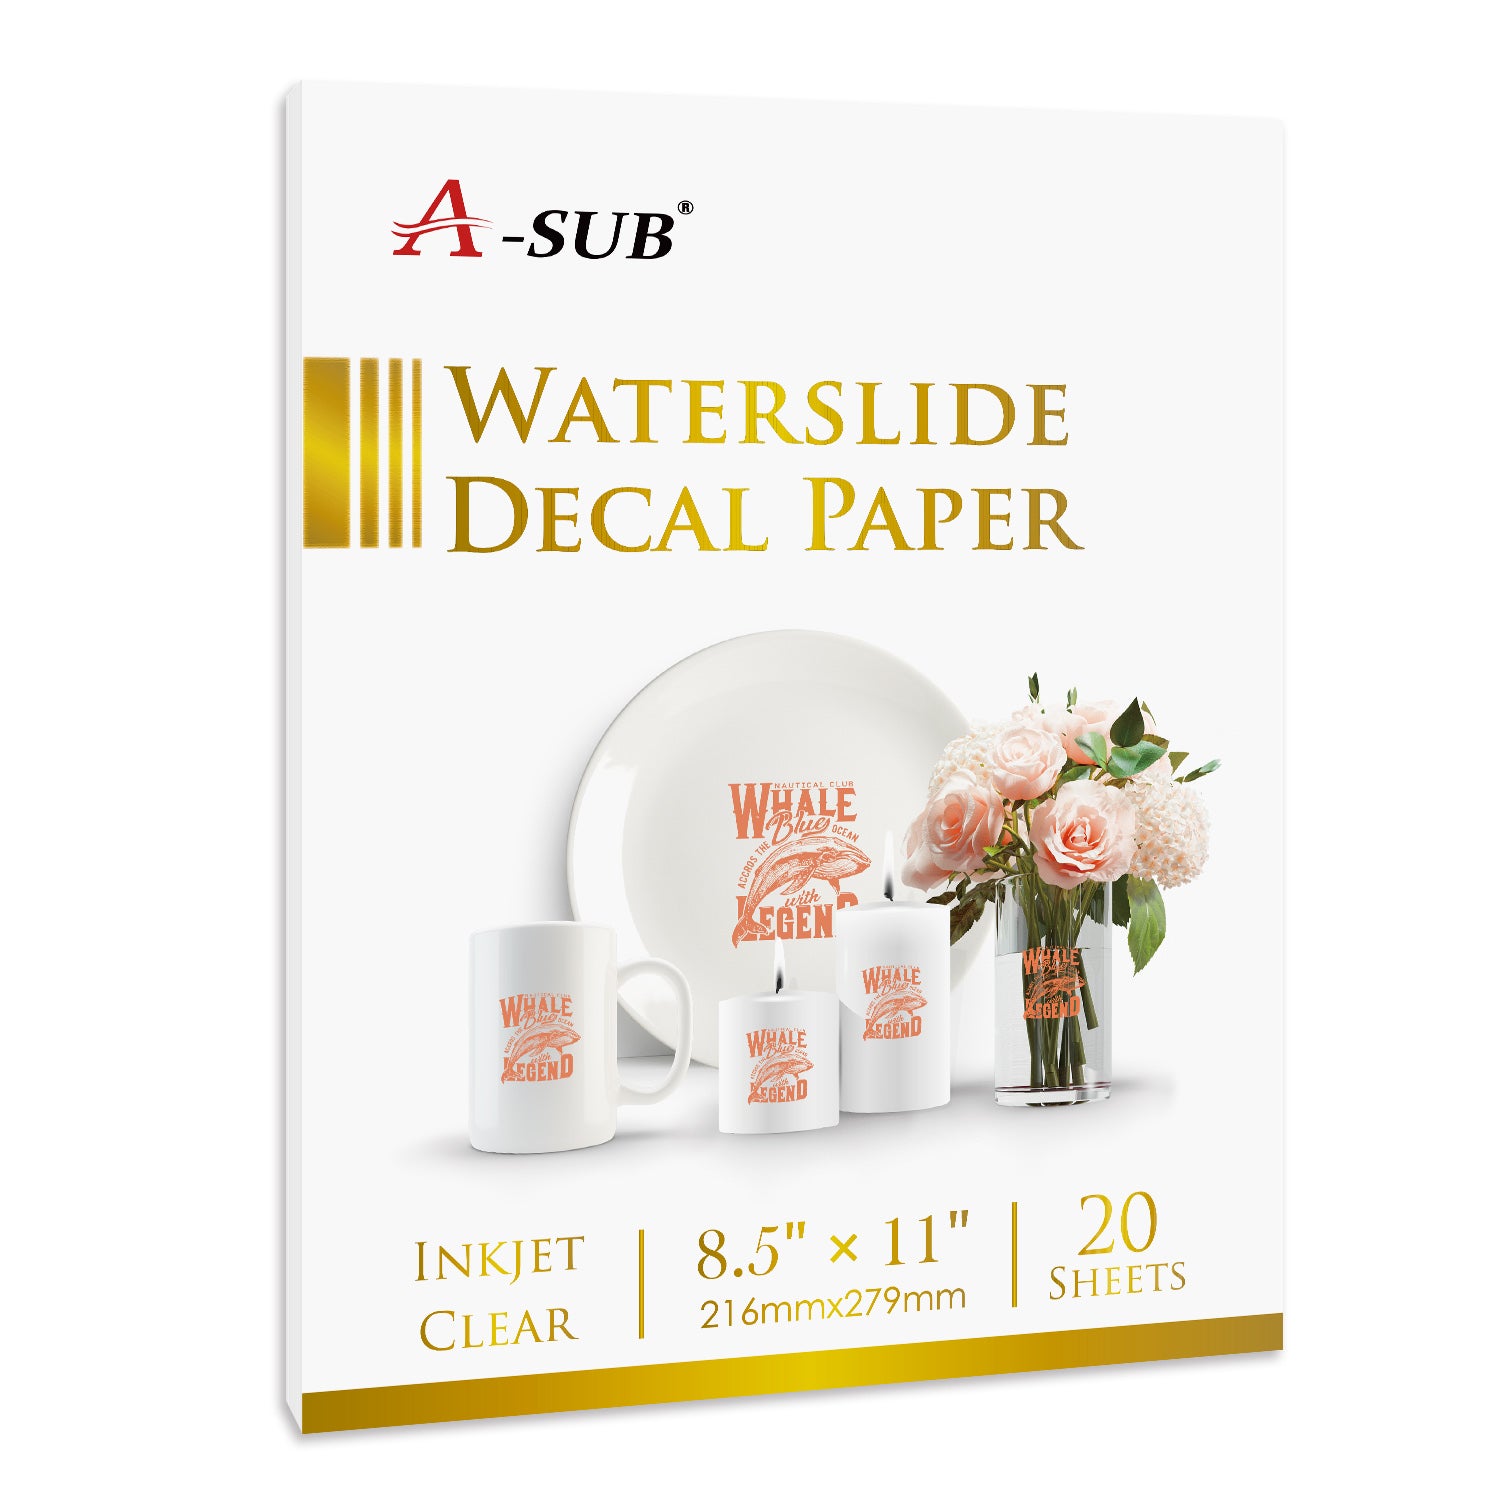 Waterslide Paper for Glitter Tumblers - How to Apply Waterslide